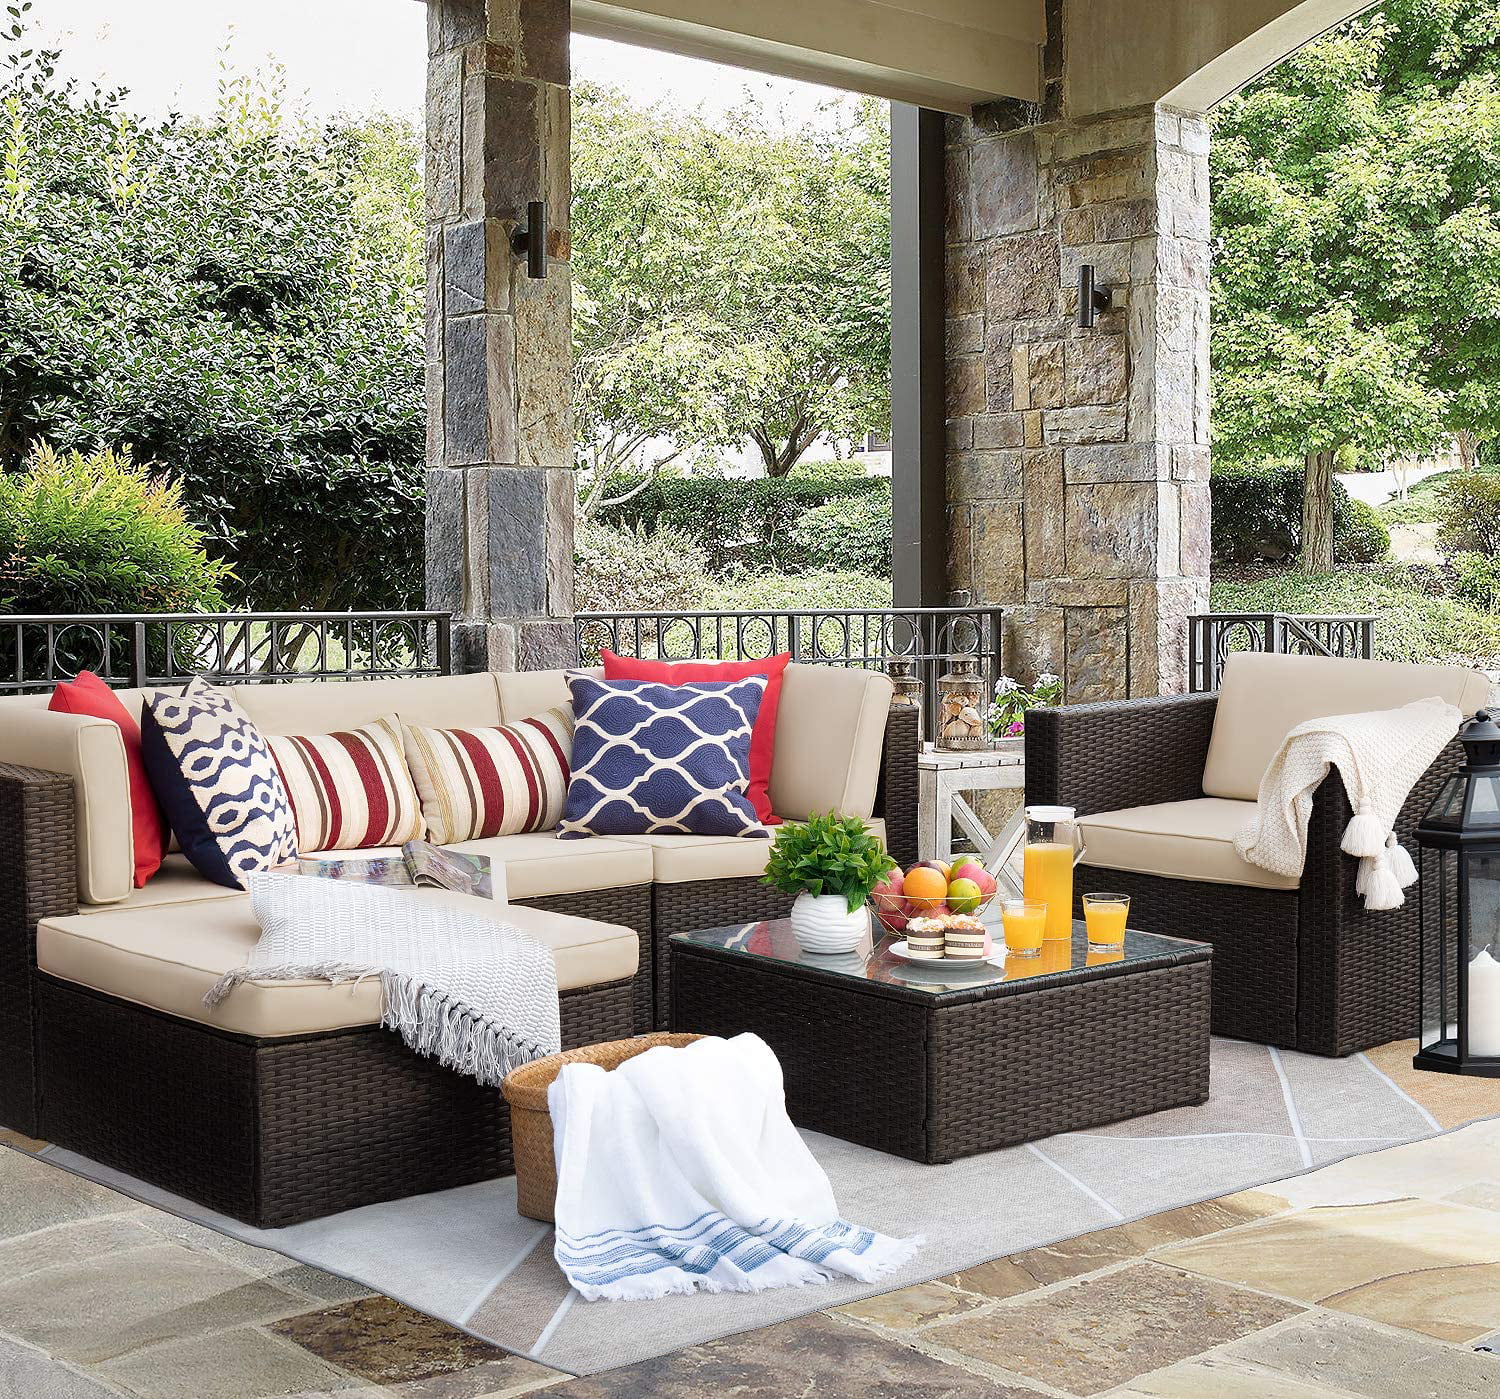 Walnew 6 Pieces Patio Furniture Set Outdoor Sectional Sofa